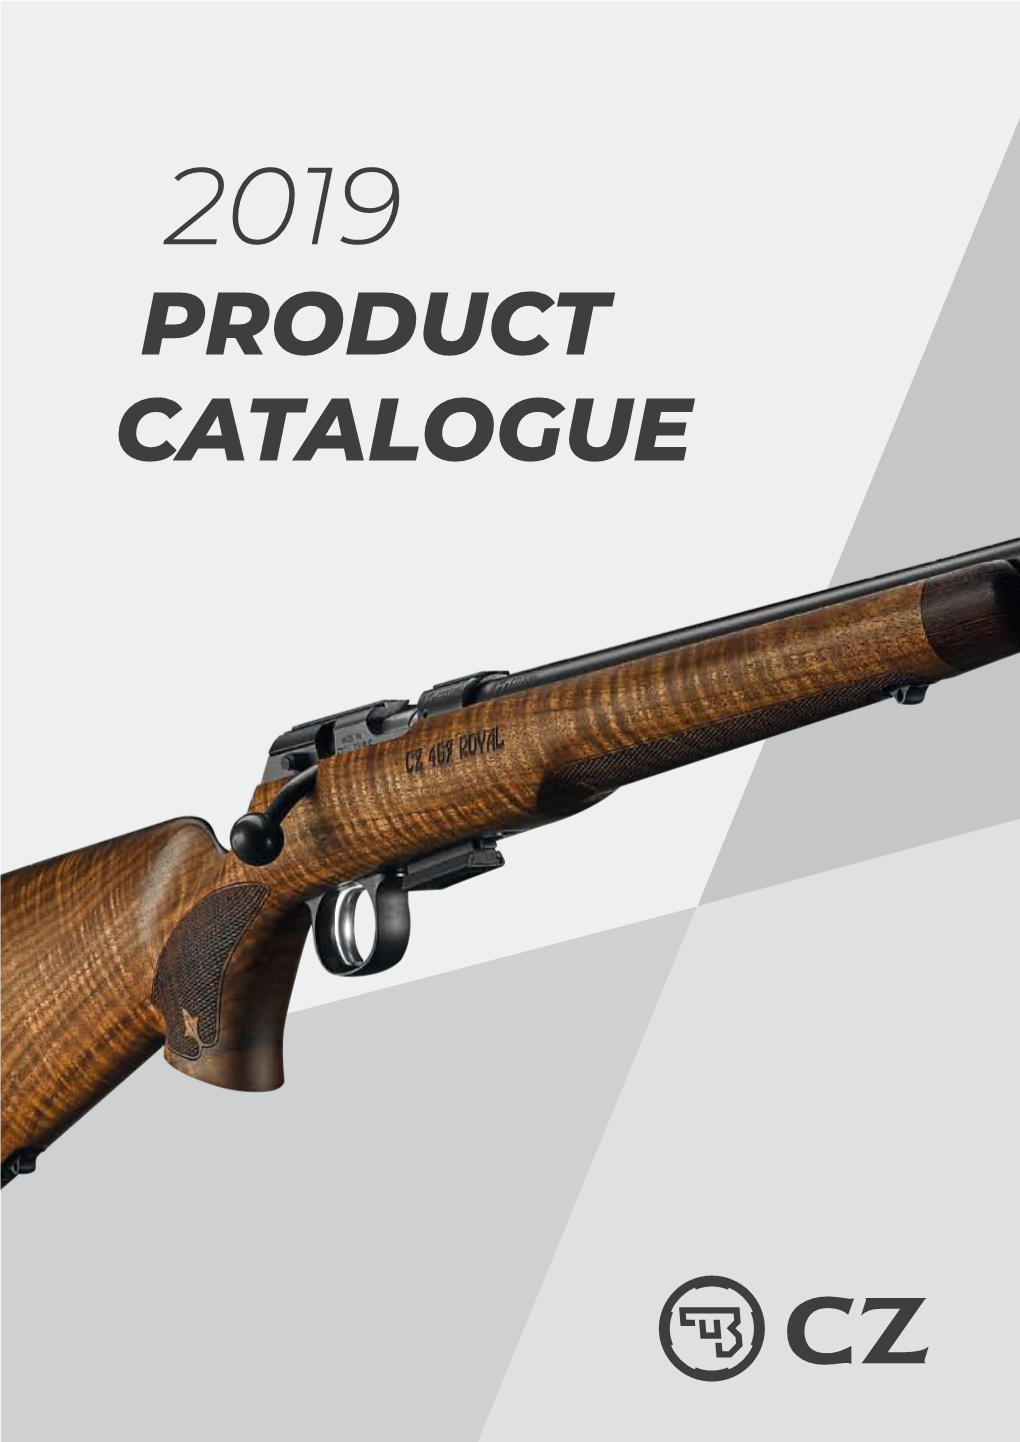 CZUB 2019 Product Catalogue